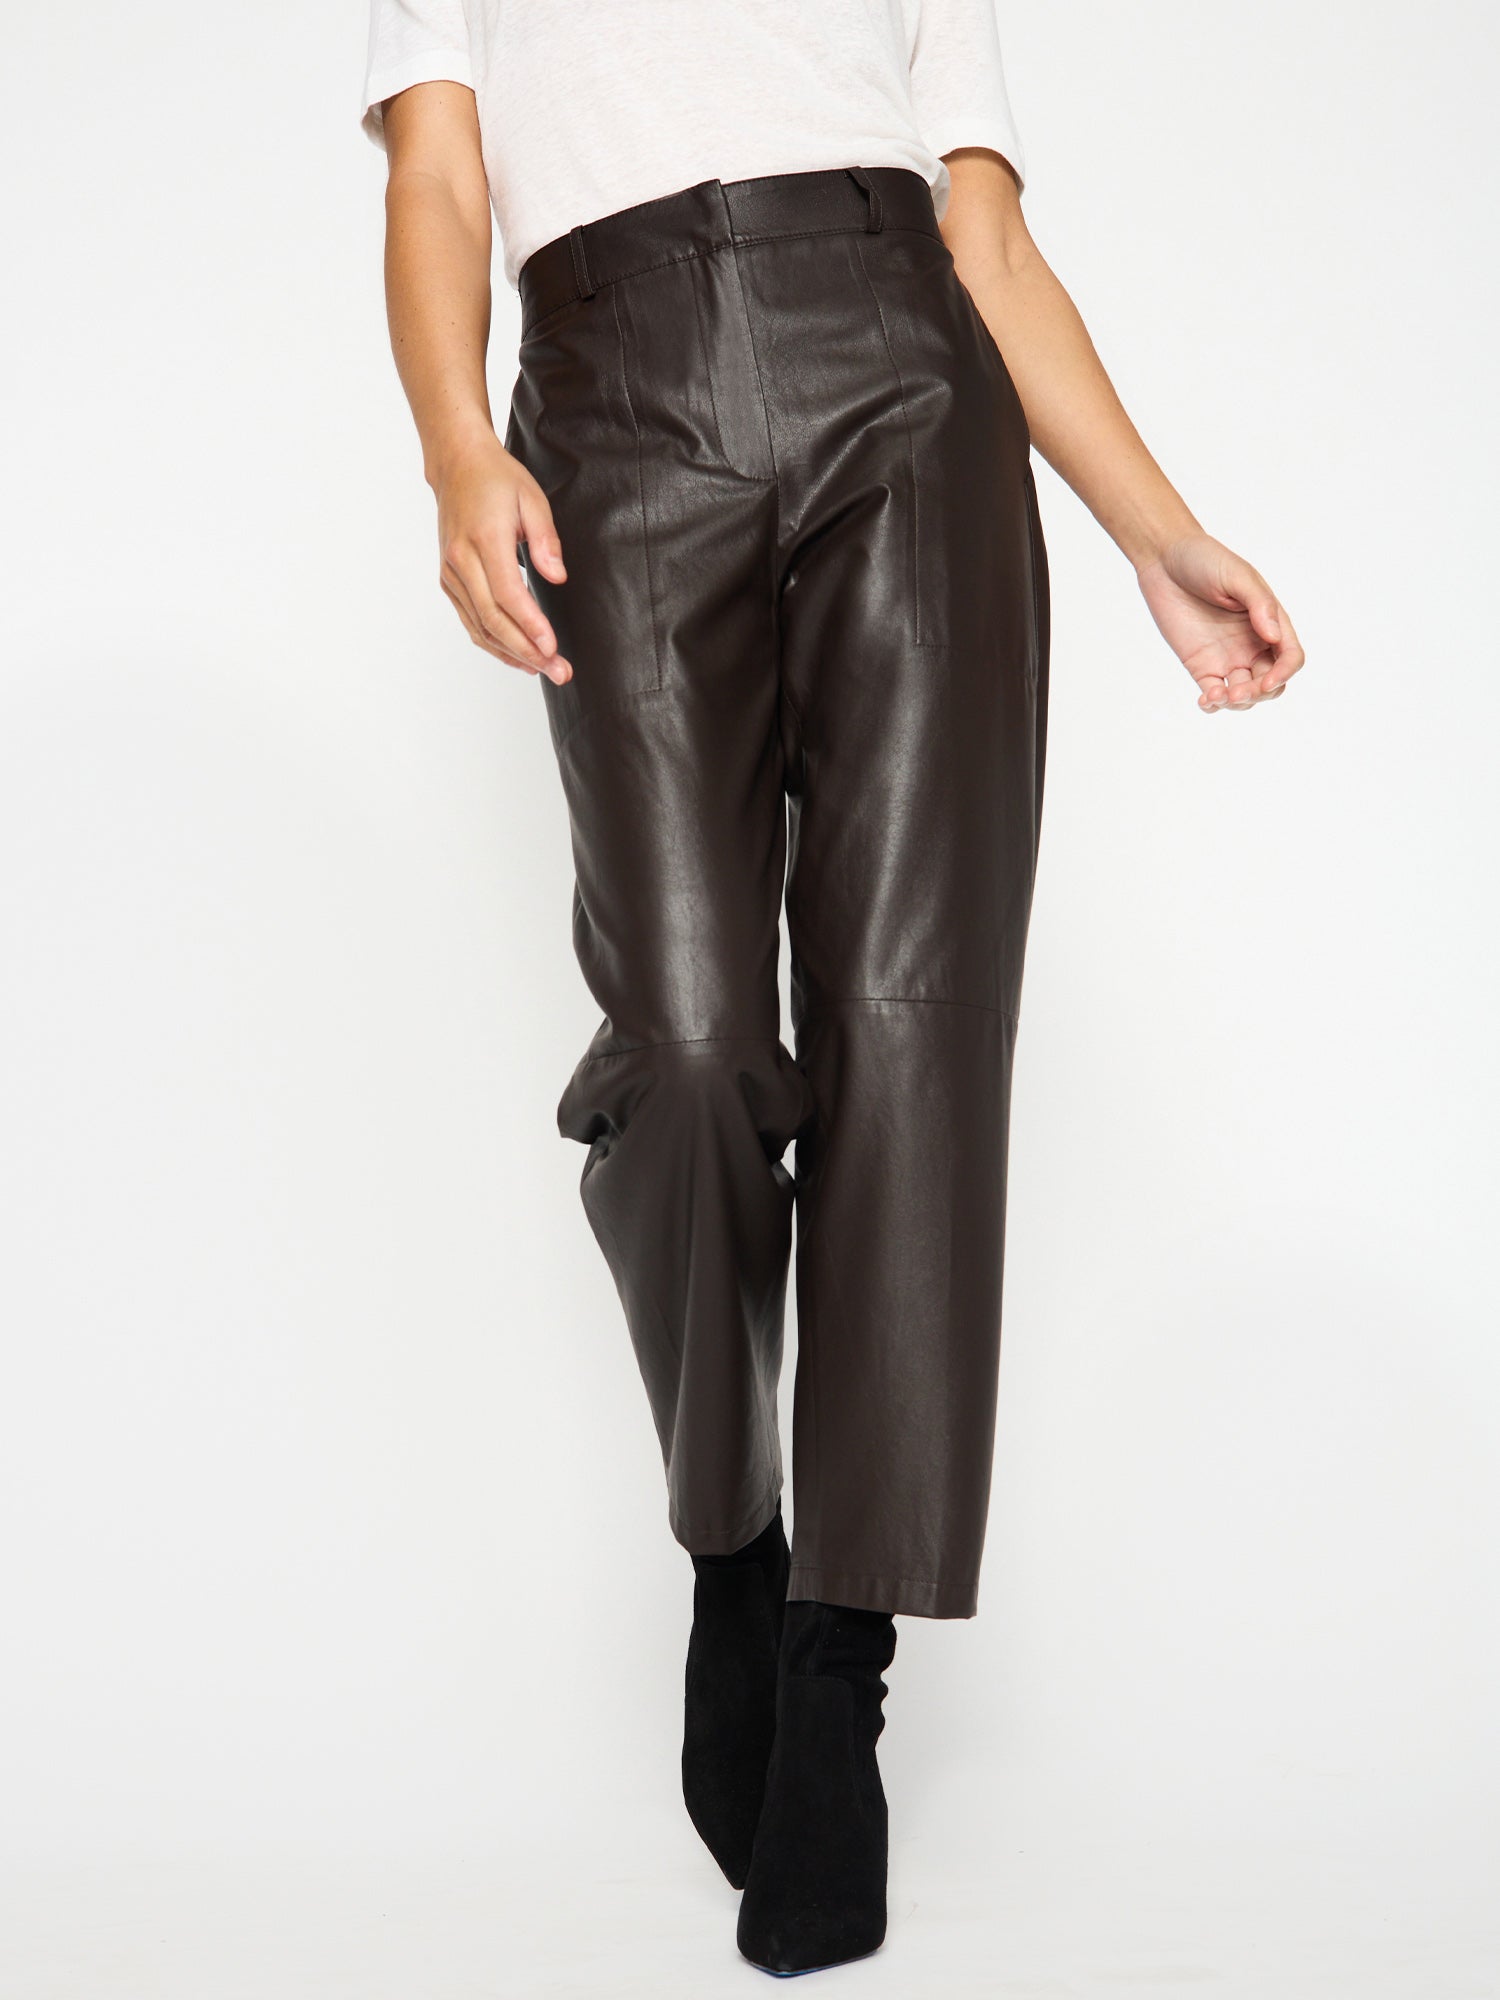 Stone vegan leather brown cropped pant front view